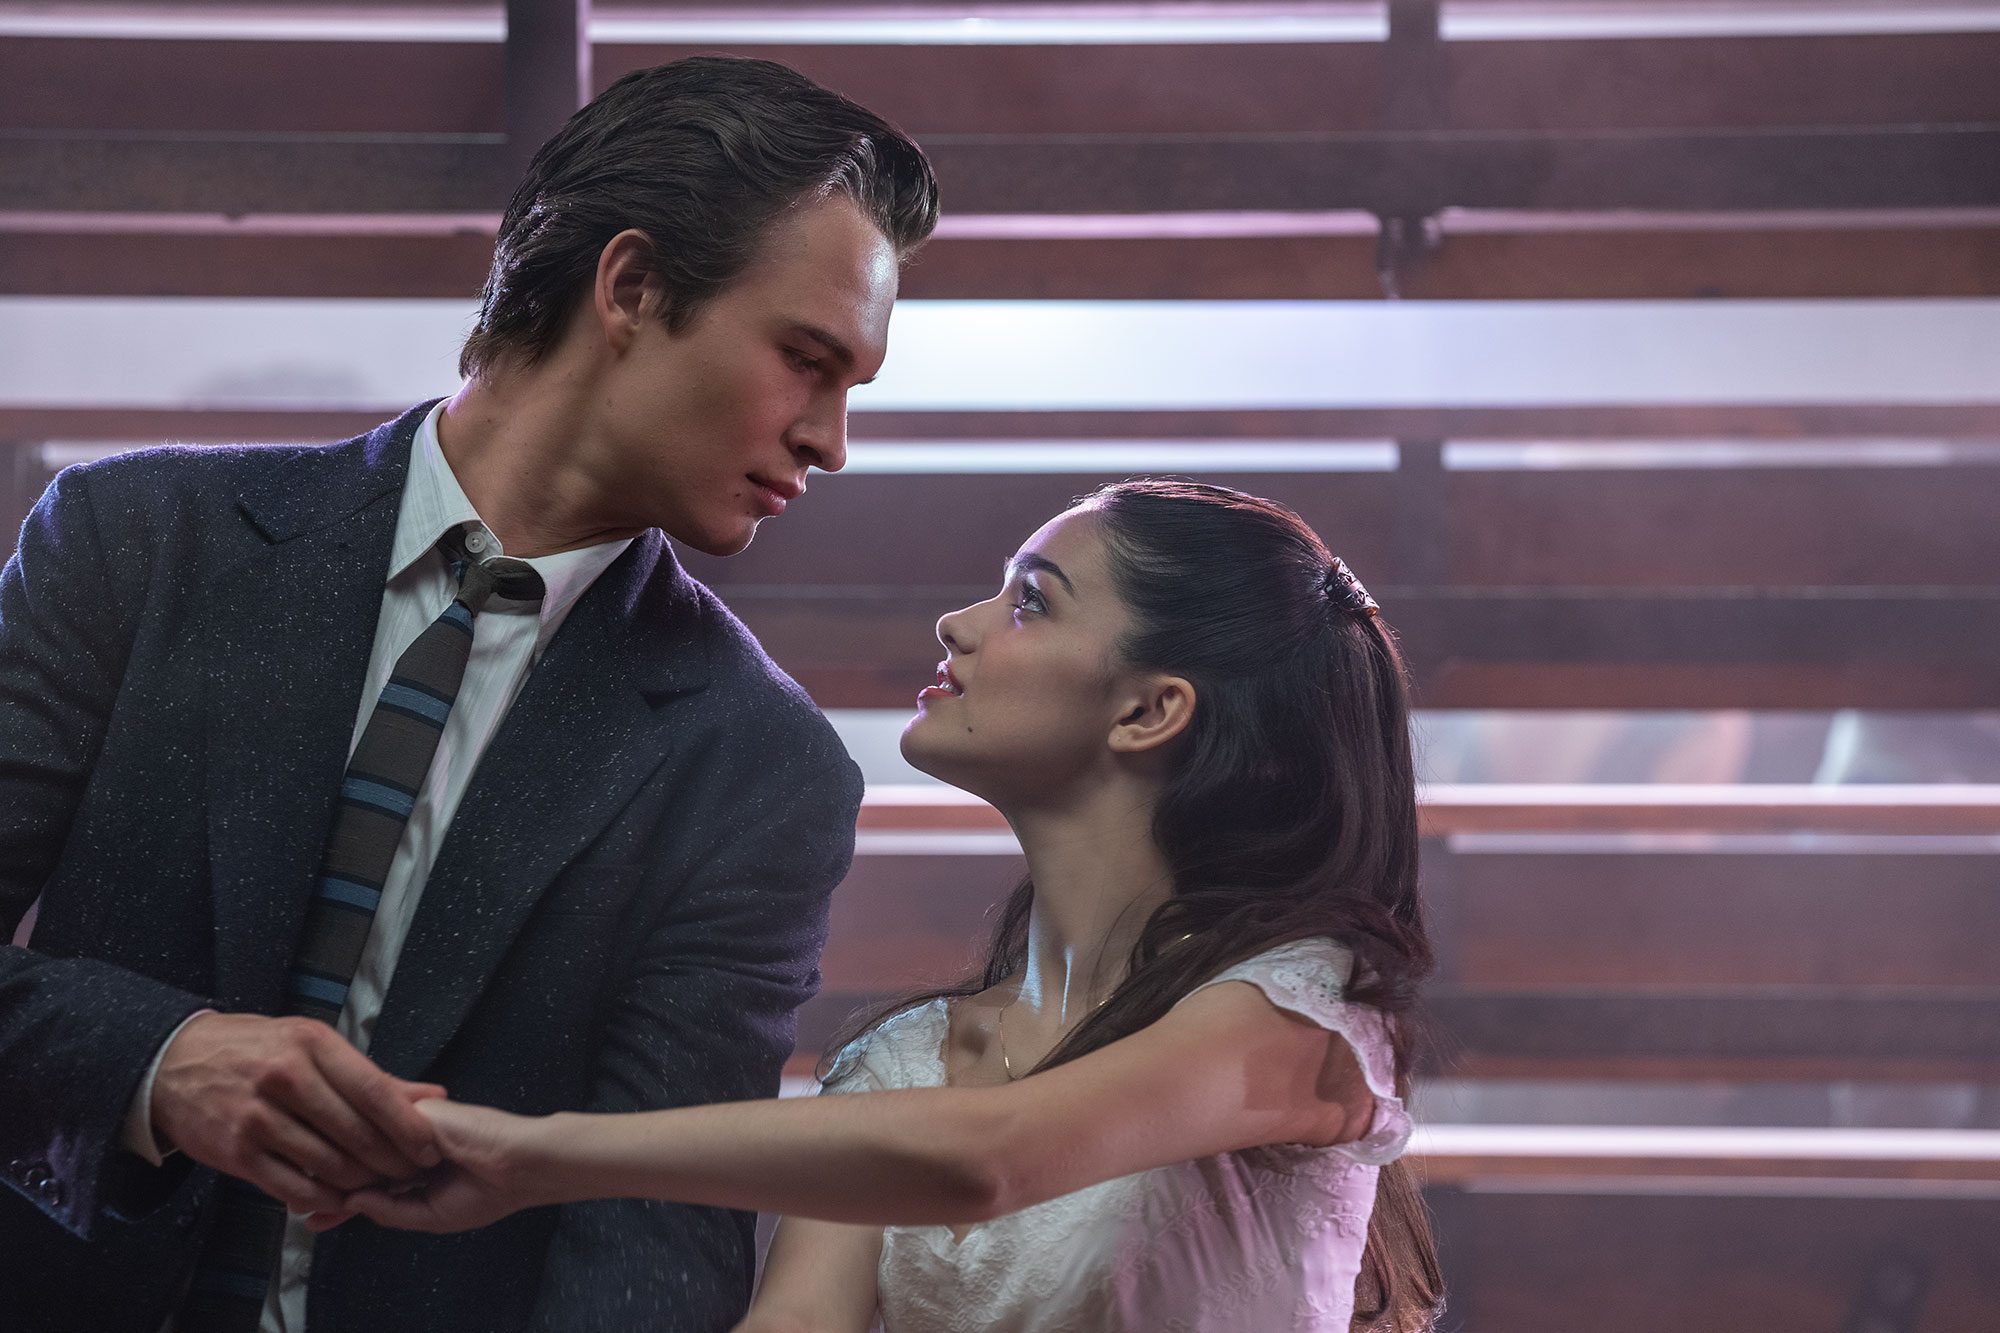 ‘West Side Story’ review: A heartfelt musical that exceeds the original